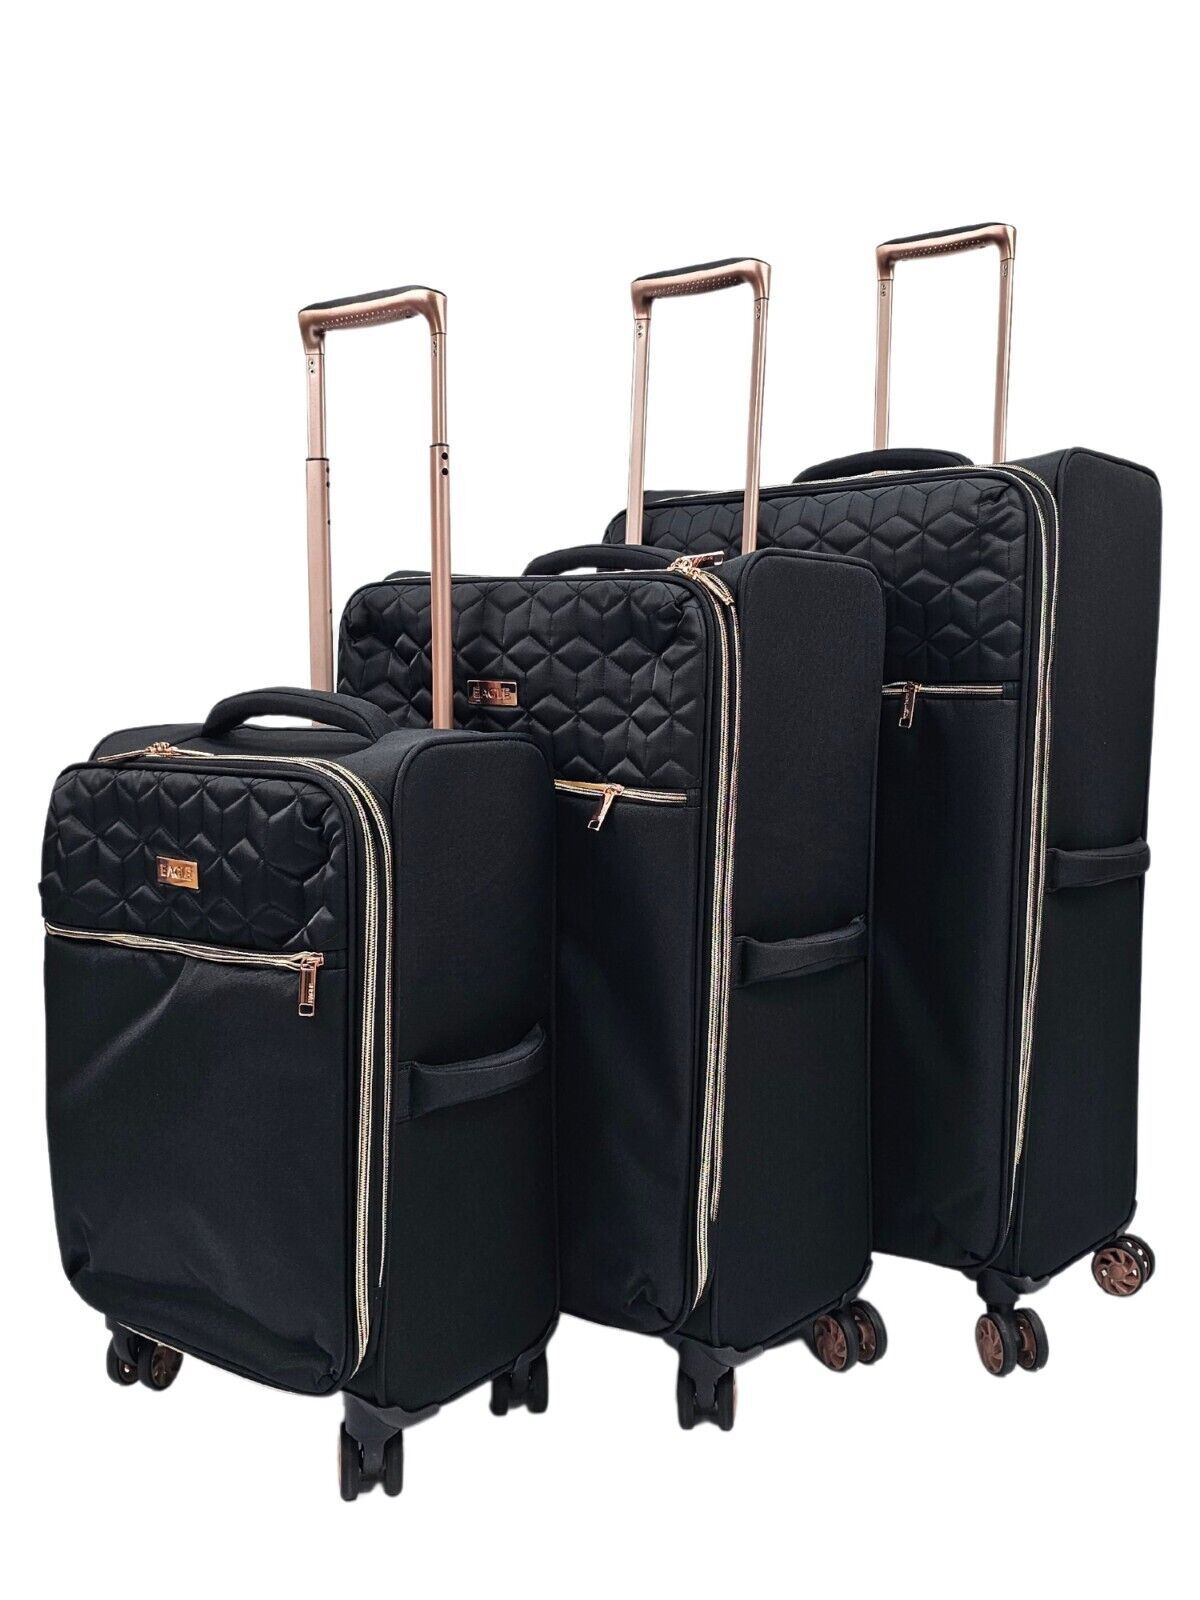 Cabin Black Suitcases Set 4 Wheel Luggage Travel Lightweight Bags